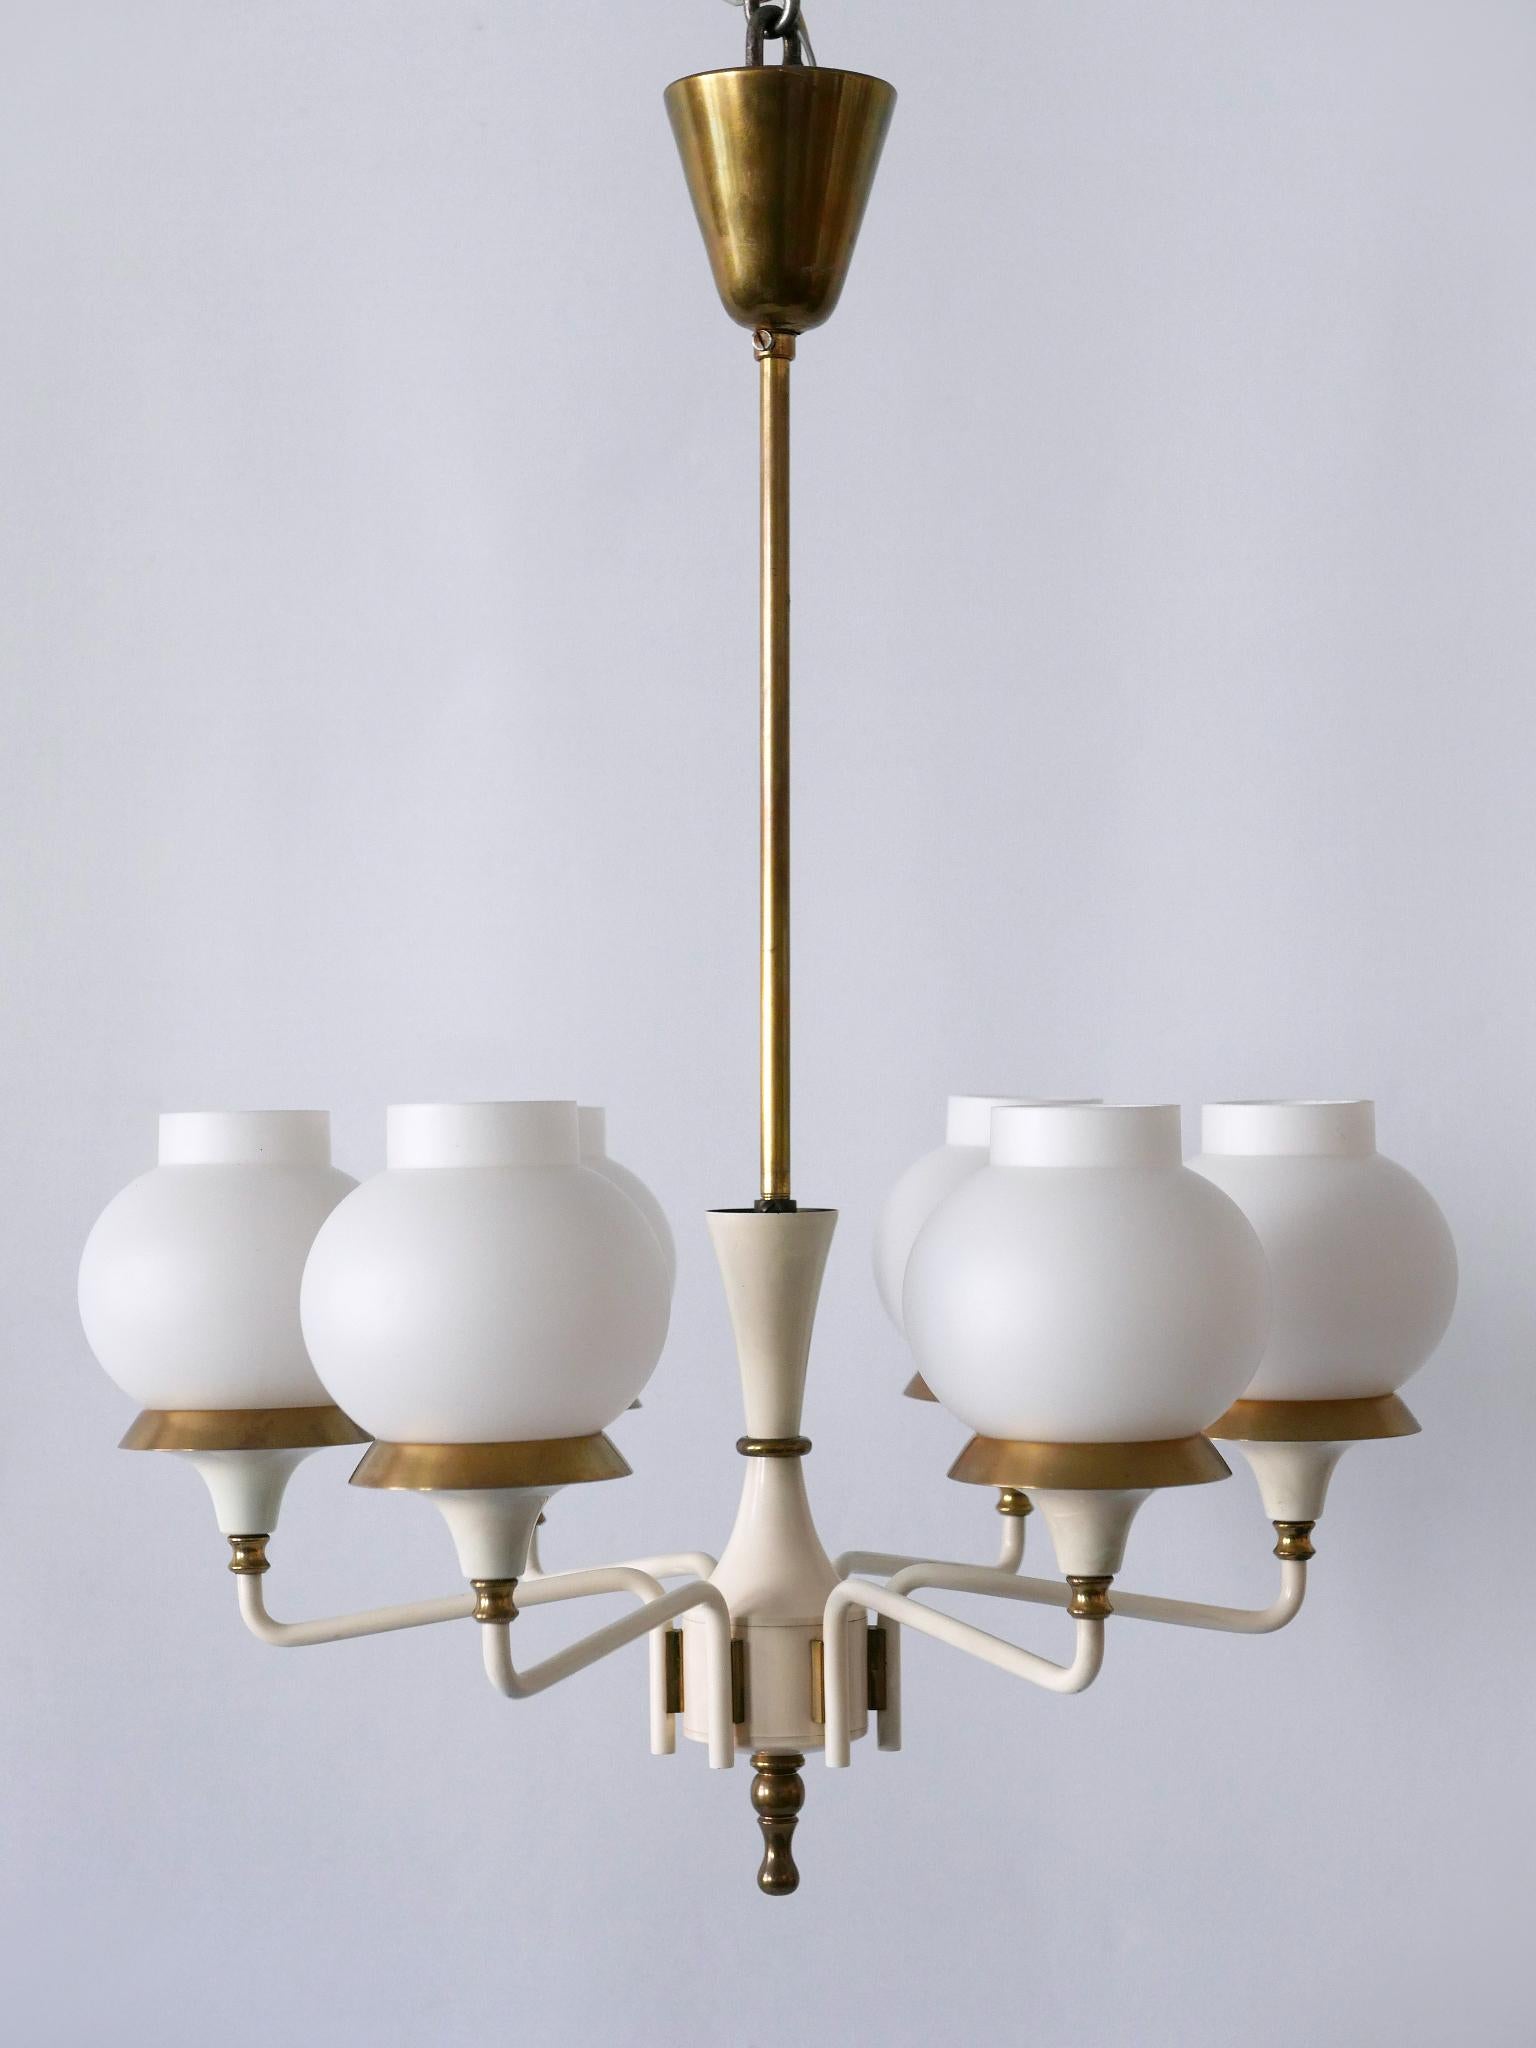 German Mid-Century Modern Six-Armed Tulipan Pendant Lamp or Chandelier by Kaiser 1950s For Sale